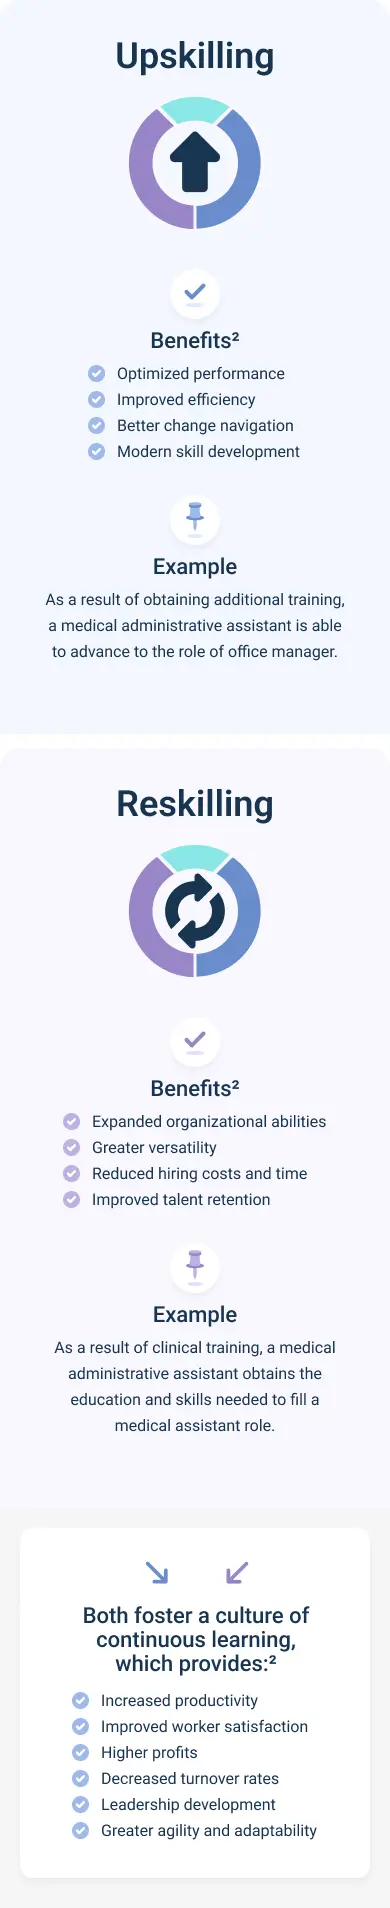 Infographic comparing the benefits of upskilling to the benefits of reskilling.